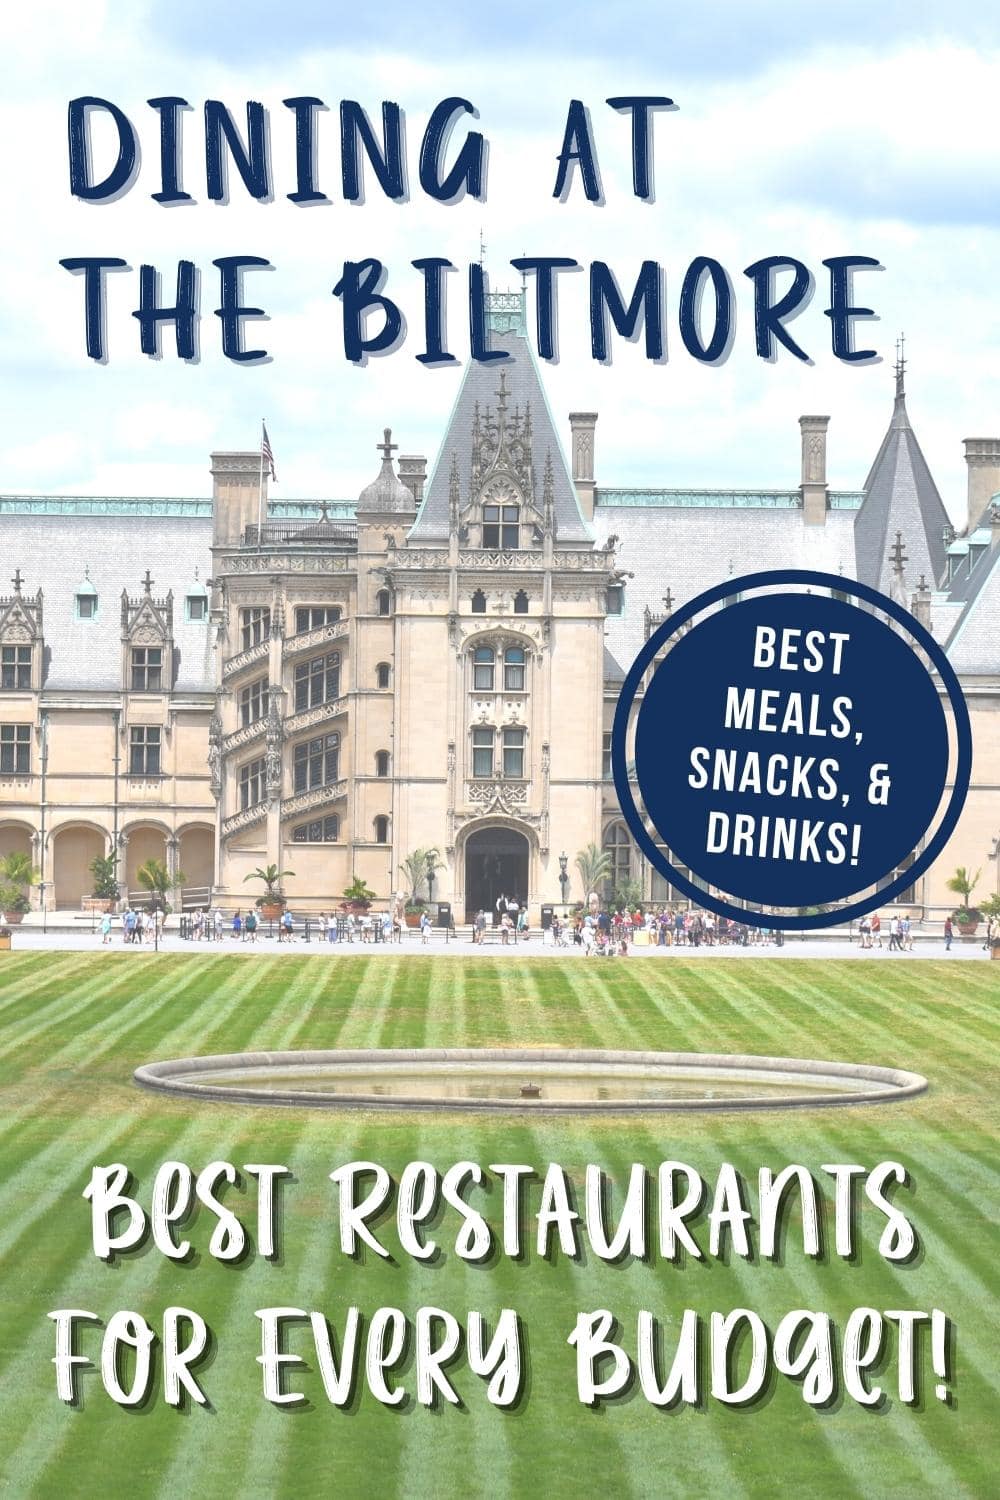 Dining at Biltmore: The Best Biltmore Restaurants for Every Budget